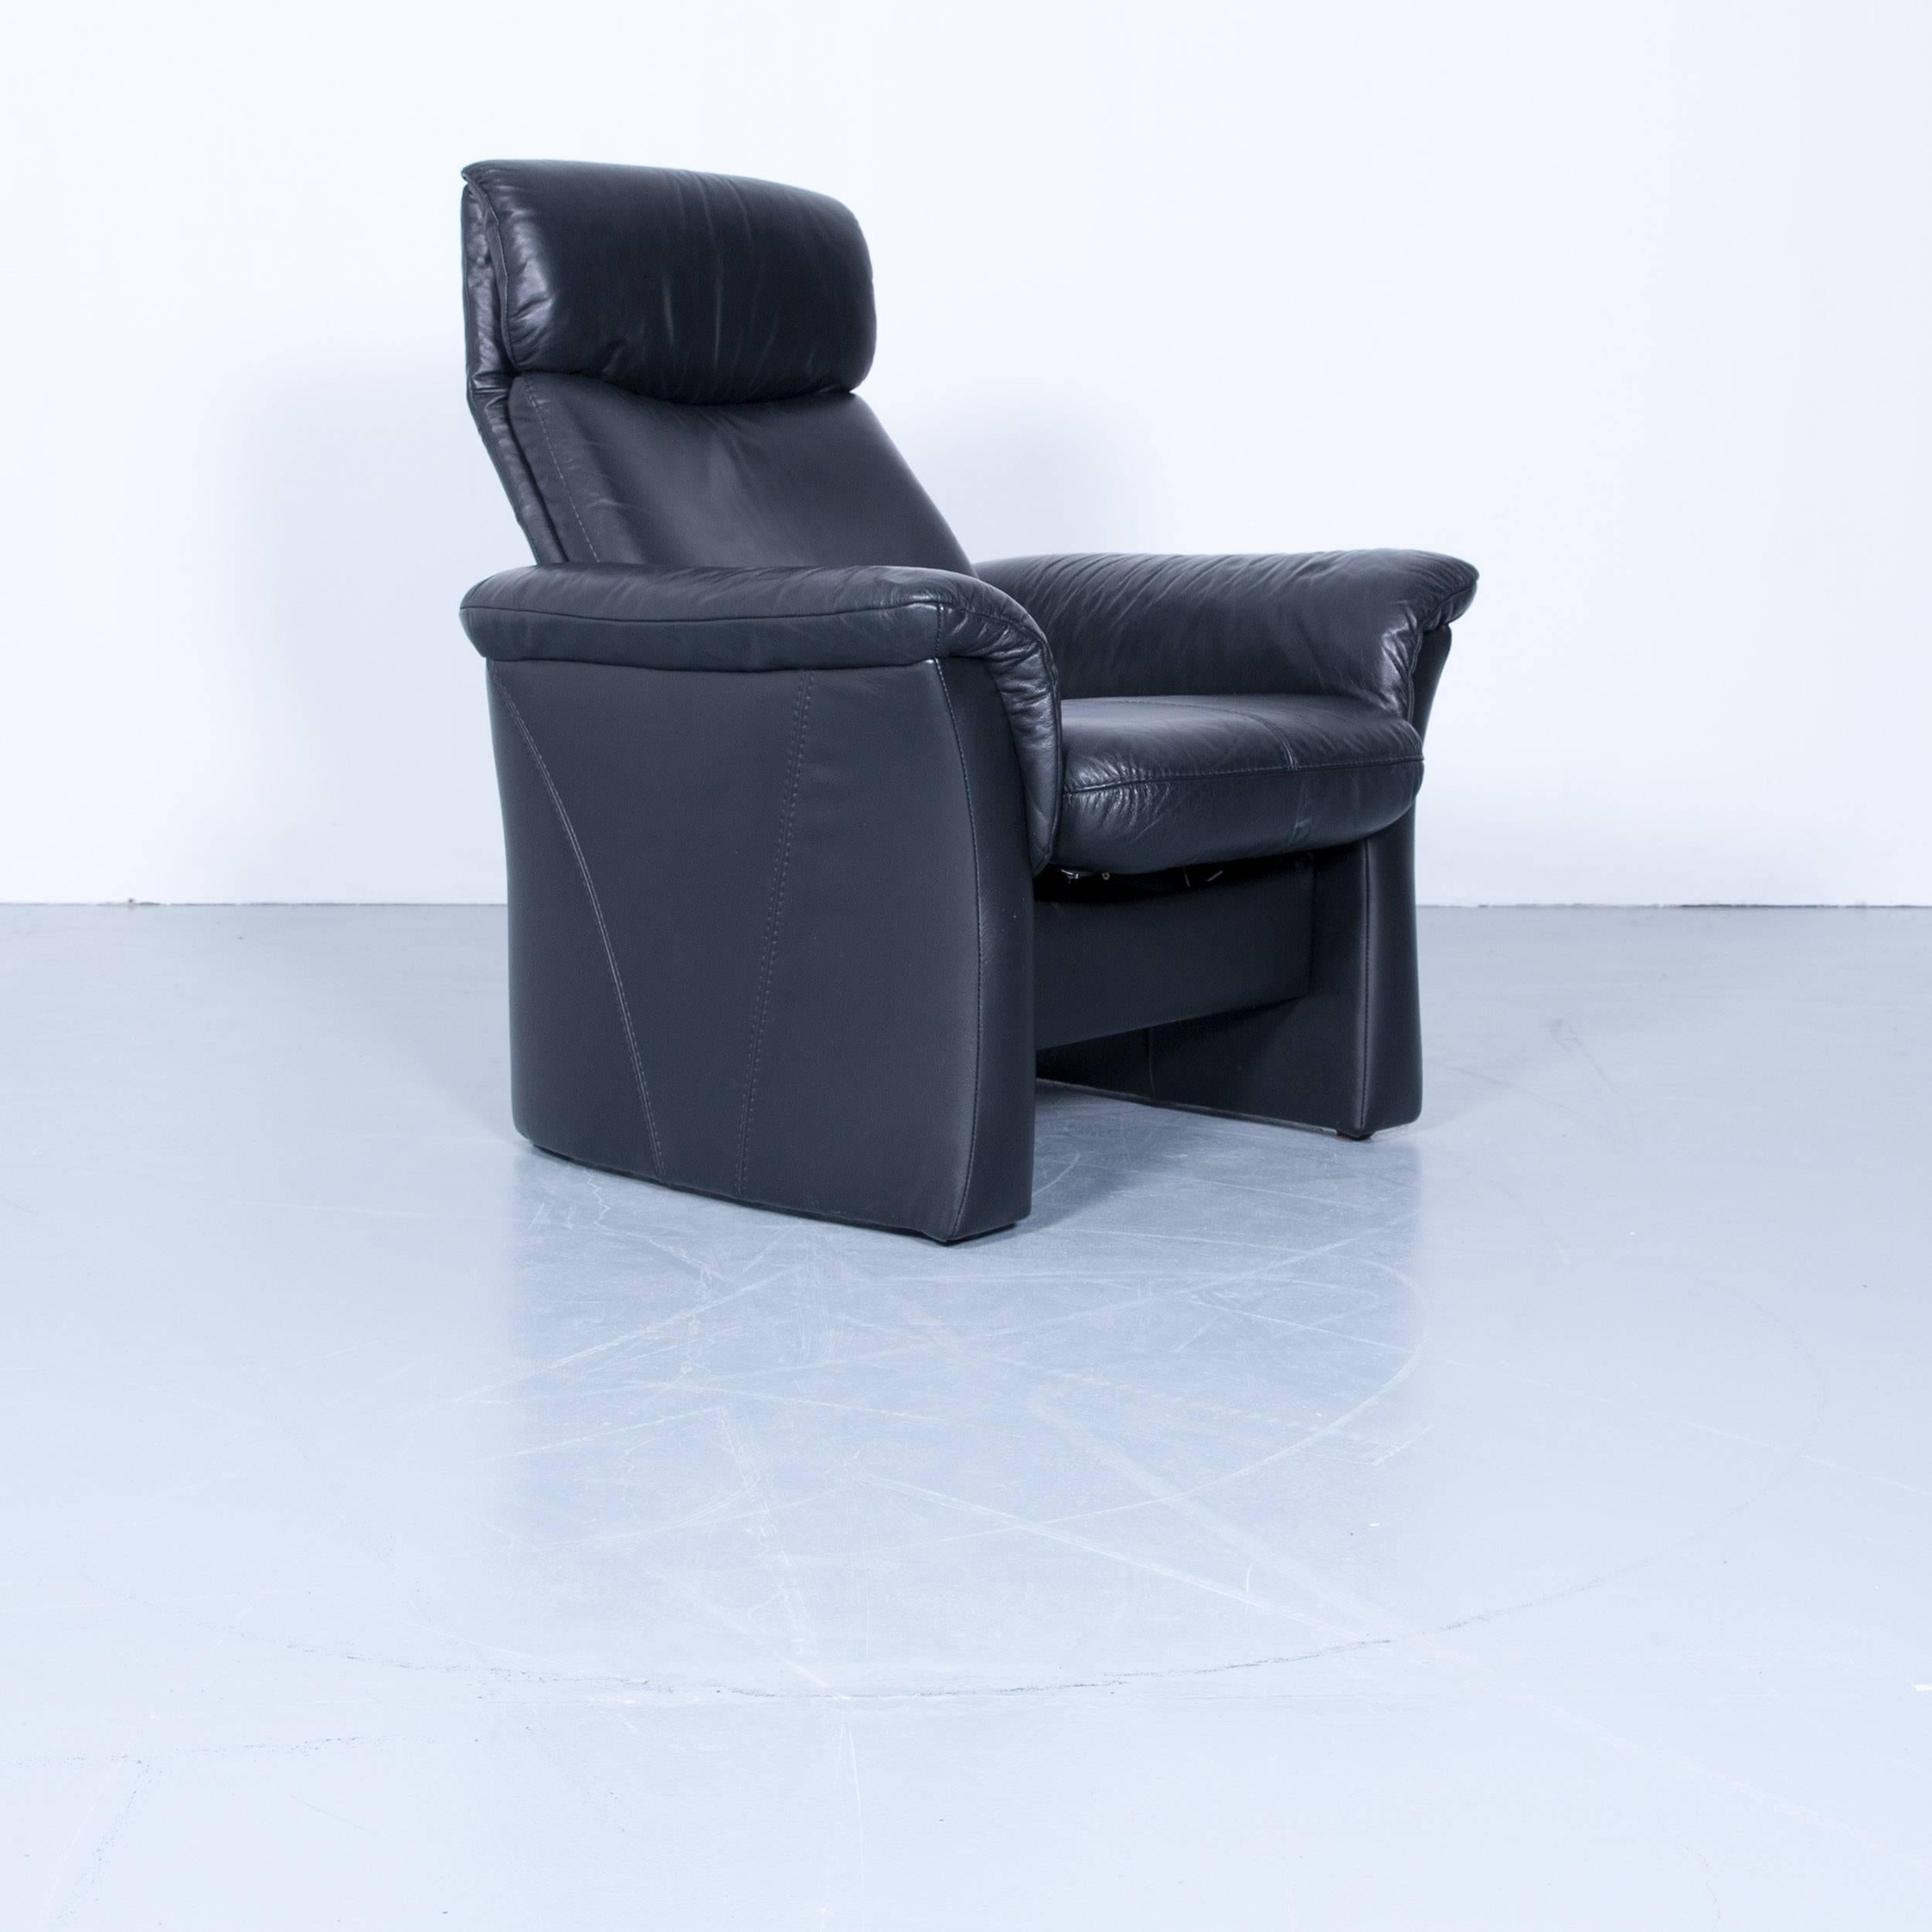 Designer chair set black leather relax function footstool pouf couch modern.